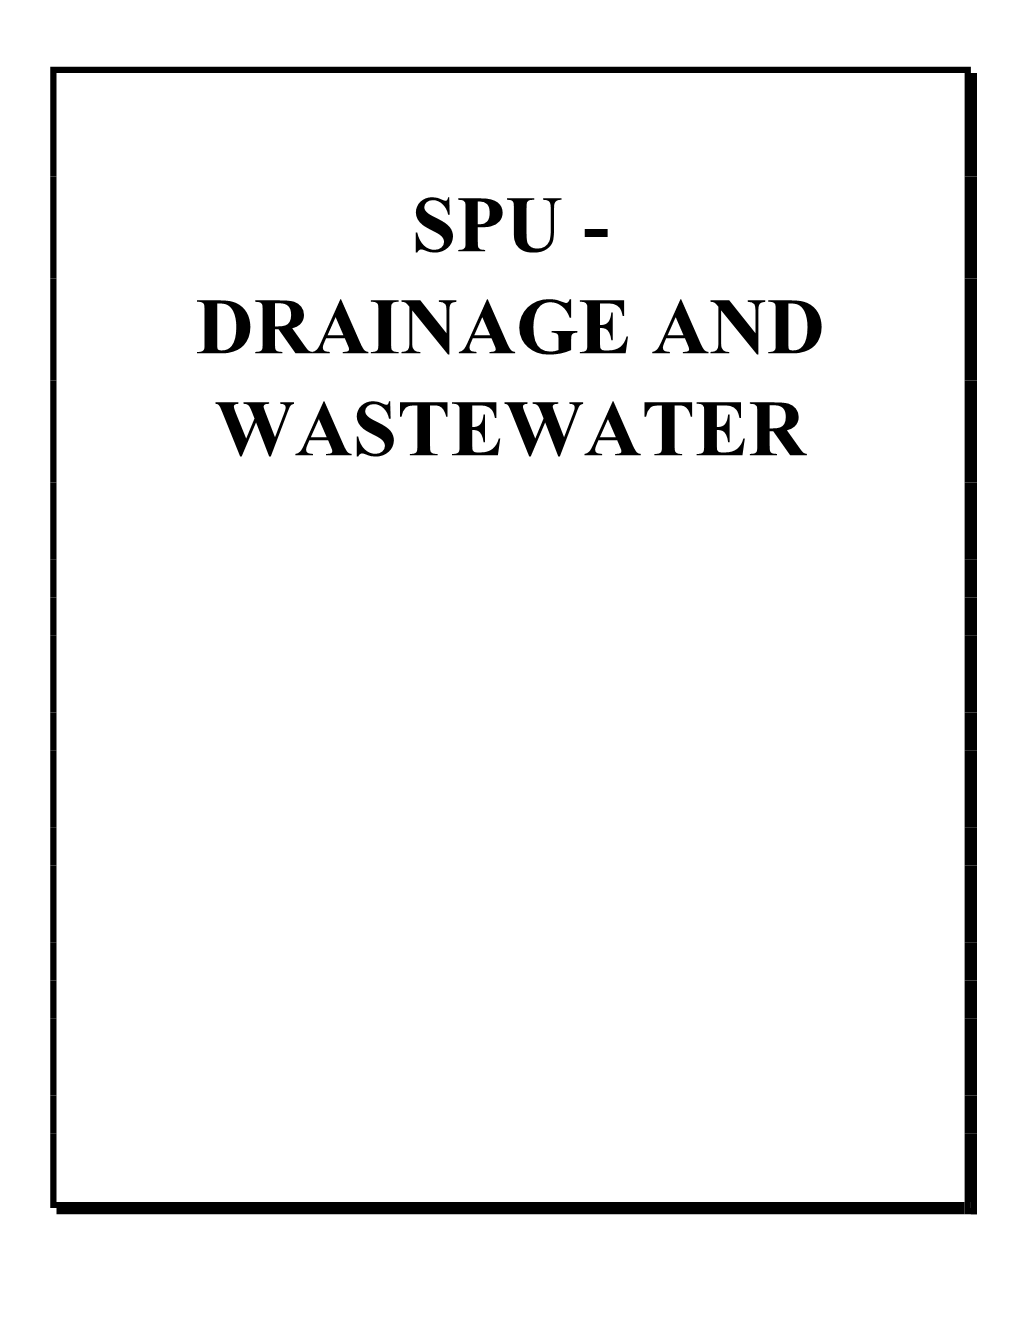 Drainage and Wastewater